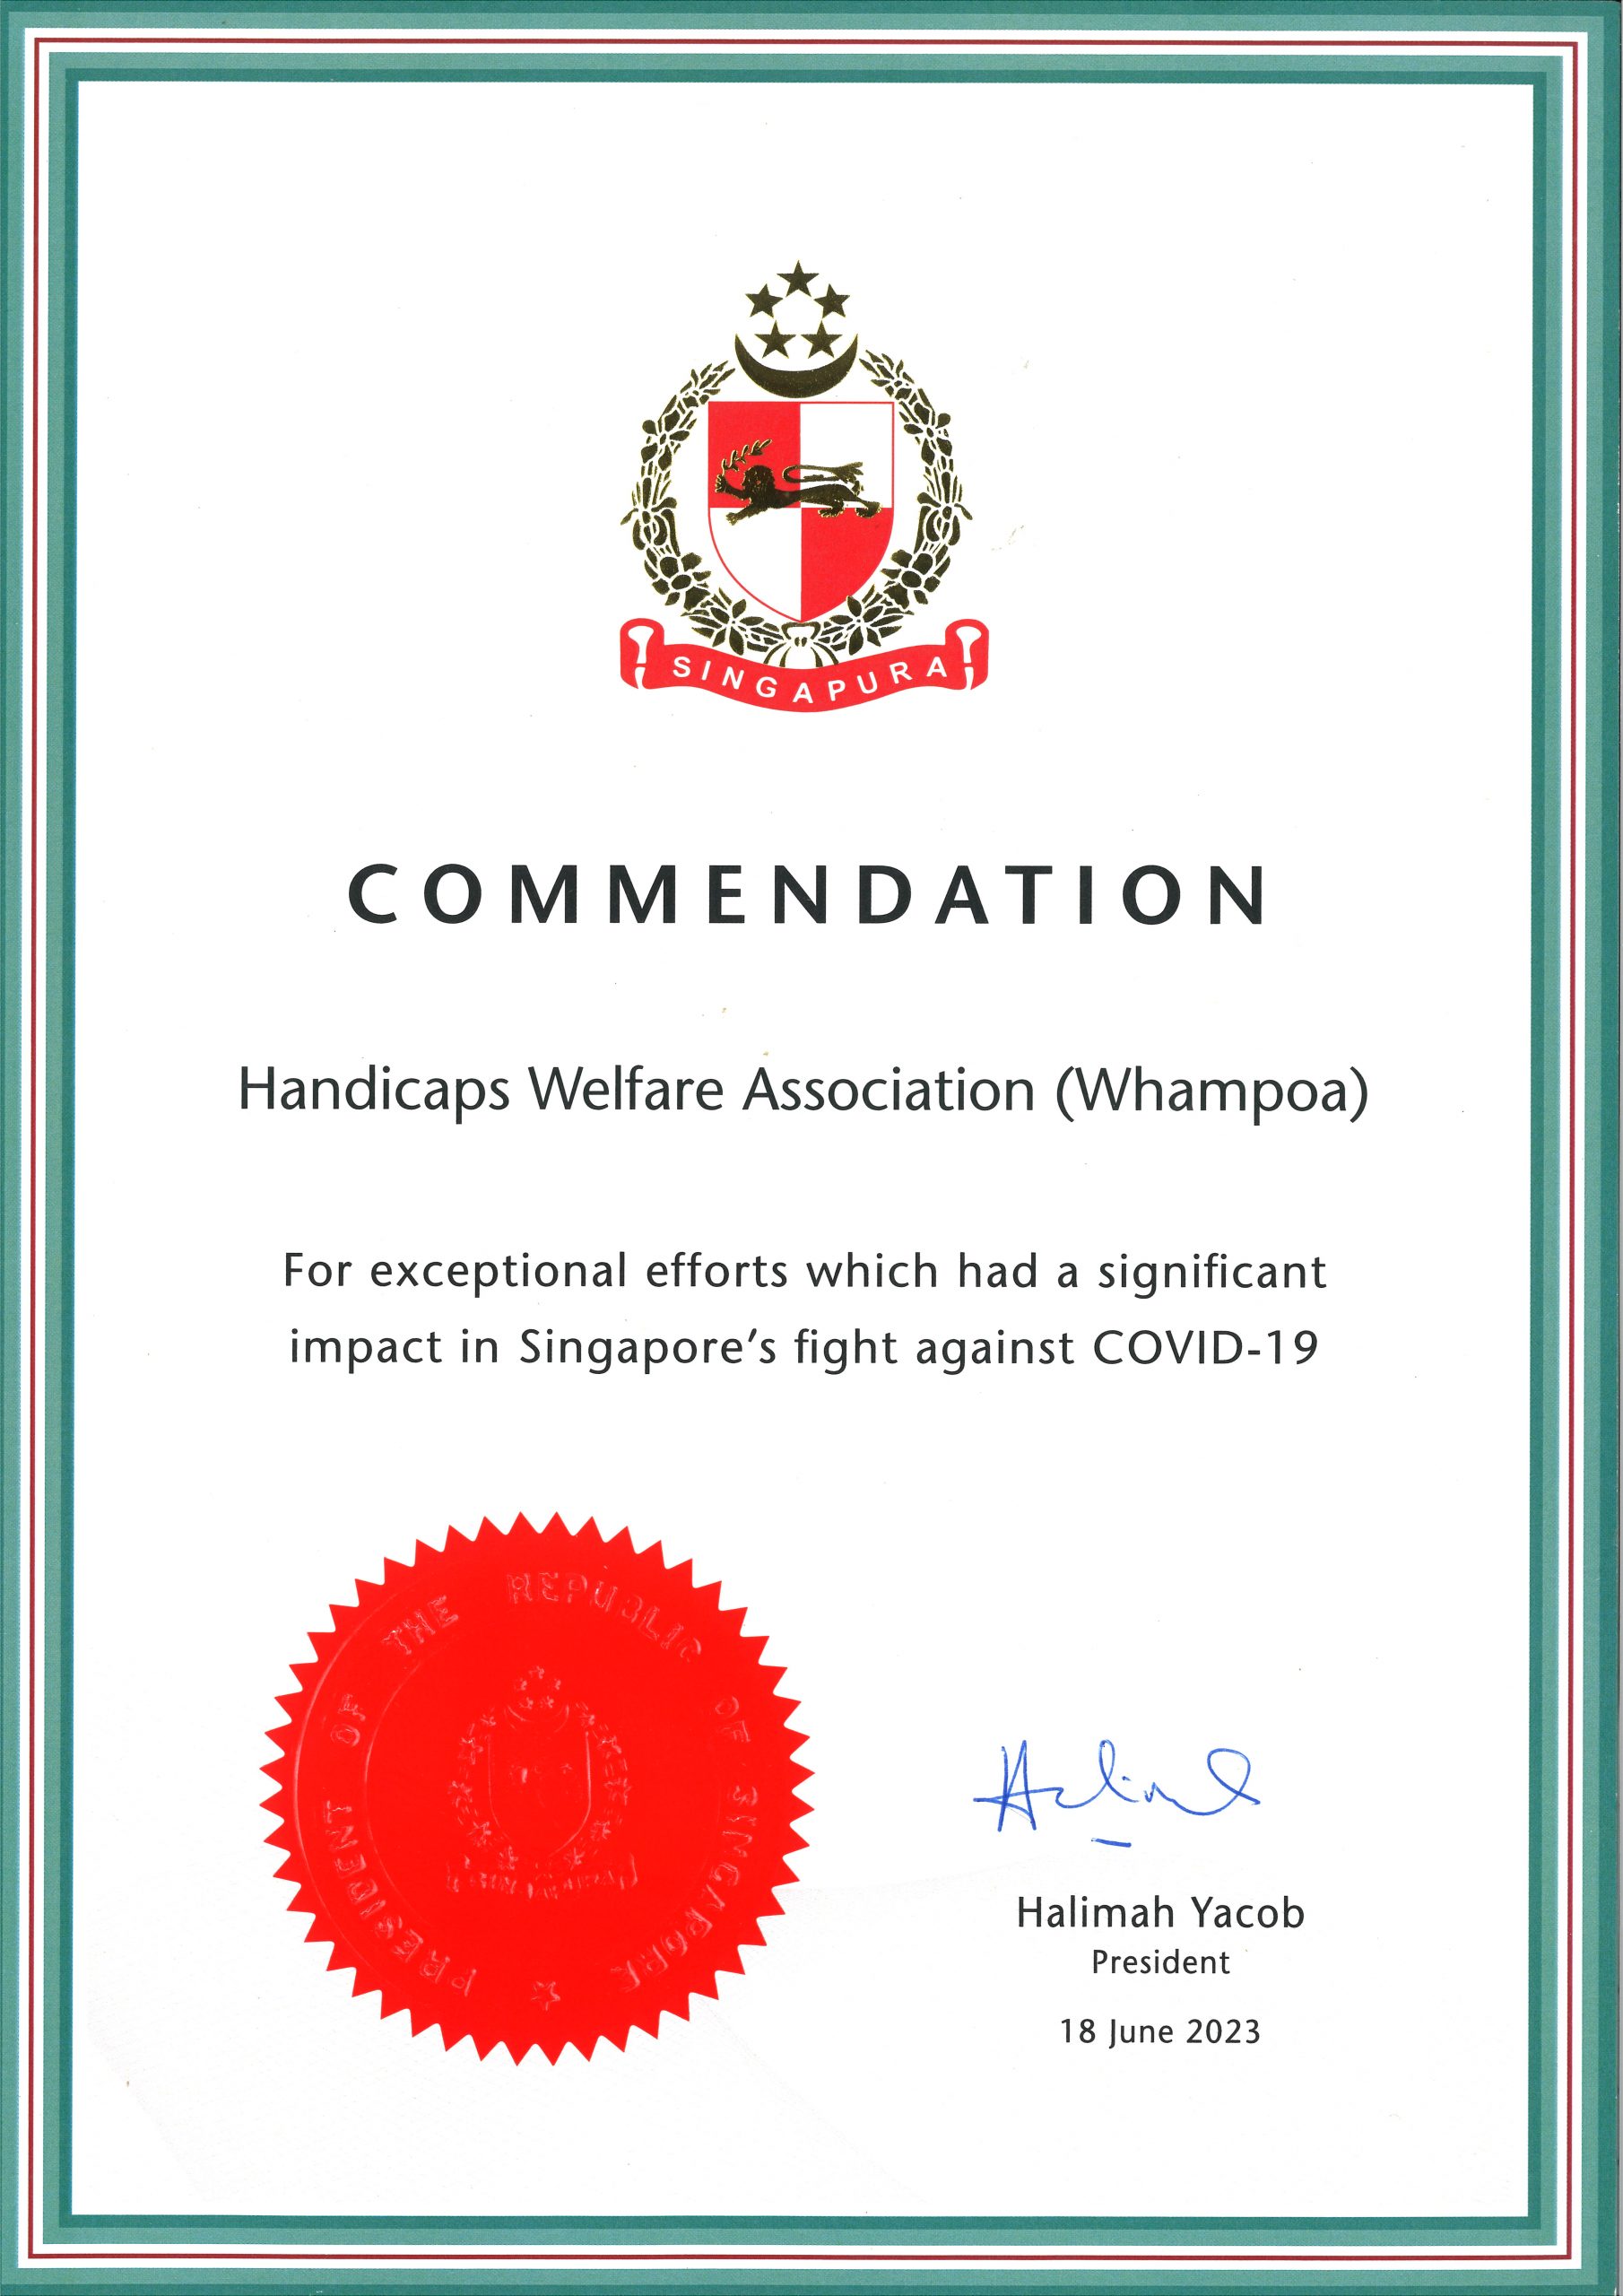 President’s Certificate of Commendation (COVID-19)